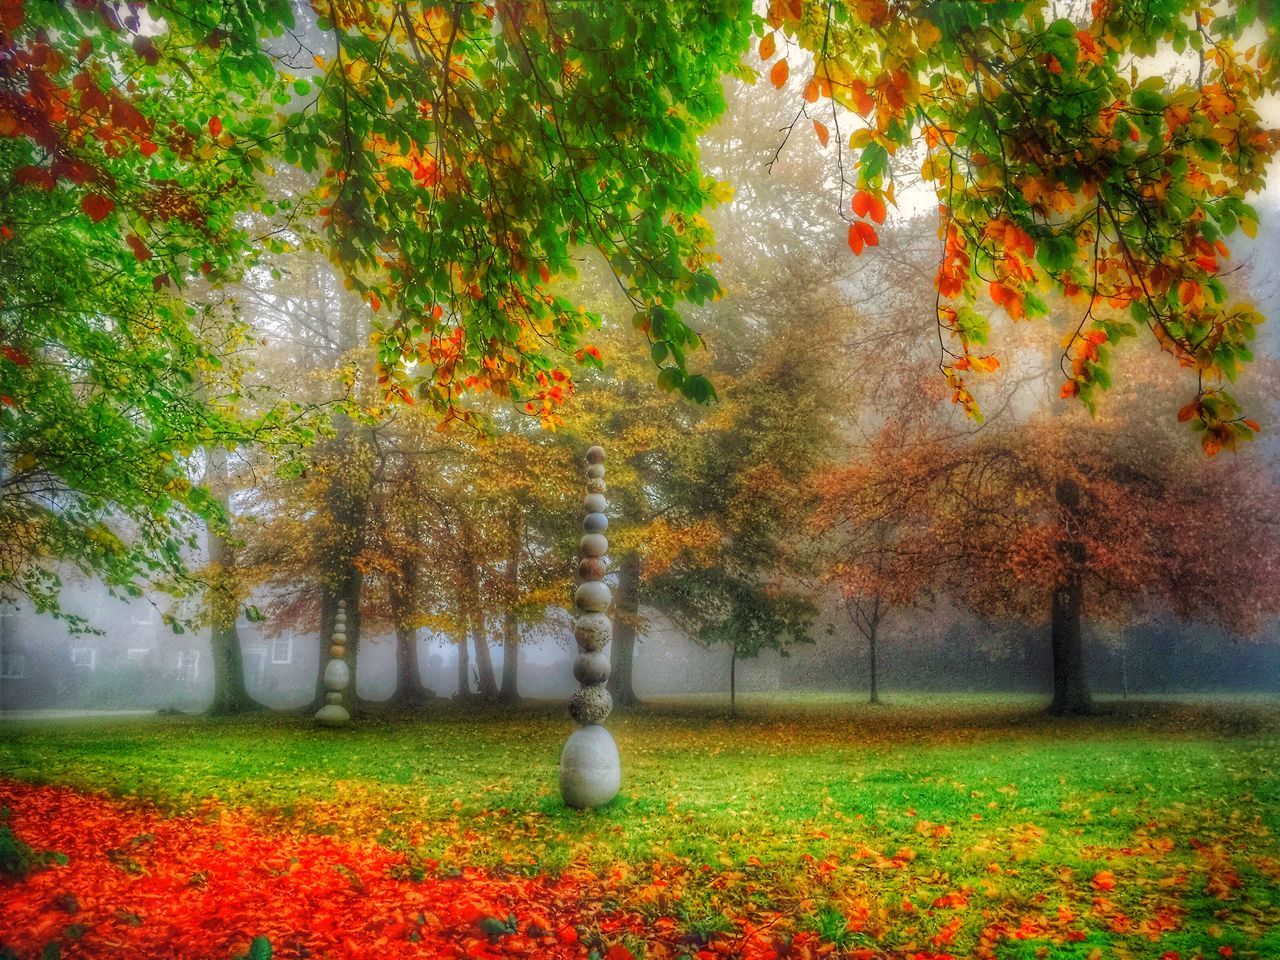 tree, autumn, change, season, growth, beauty in nature, nature, tranquility, orange color, park - man made space, tranquil scene, scenics, red, branch, flower, leaf, field, day, grass, outdoors